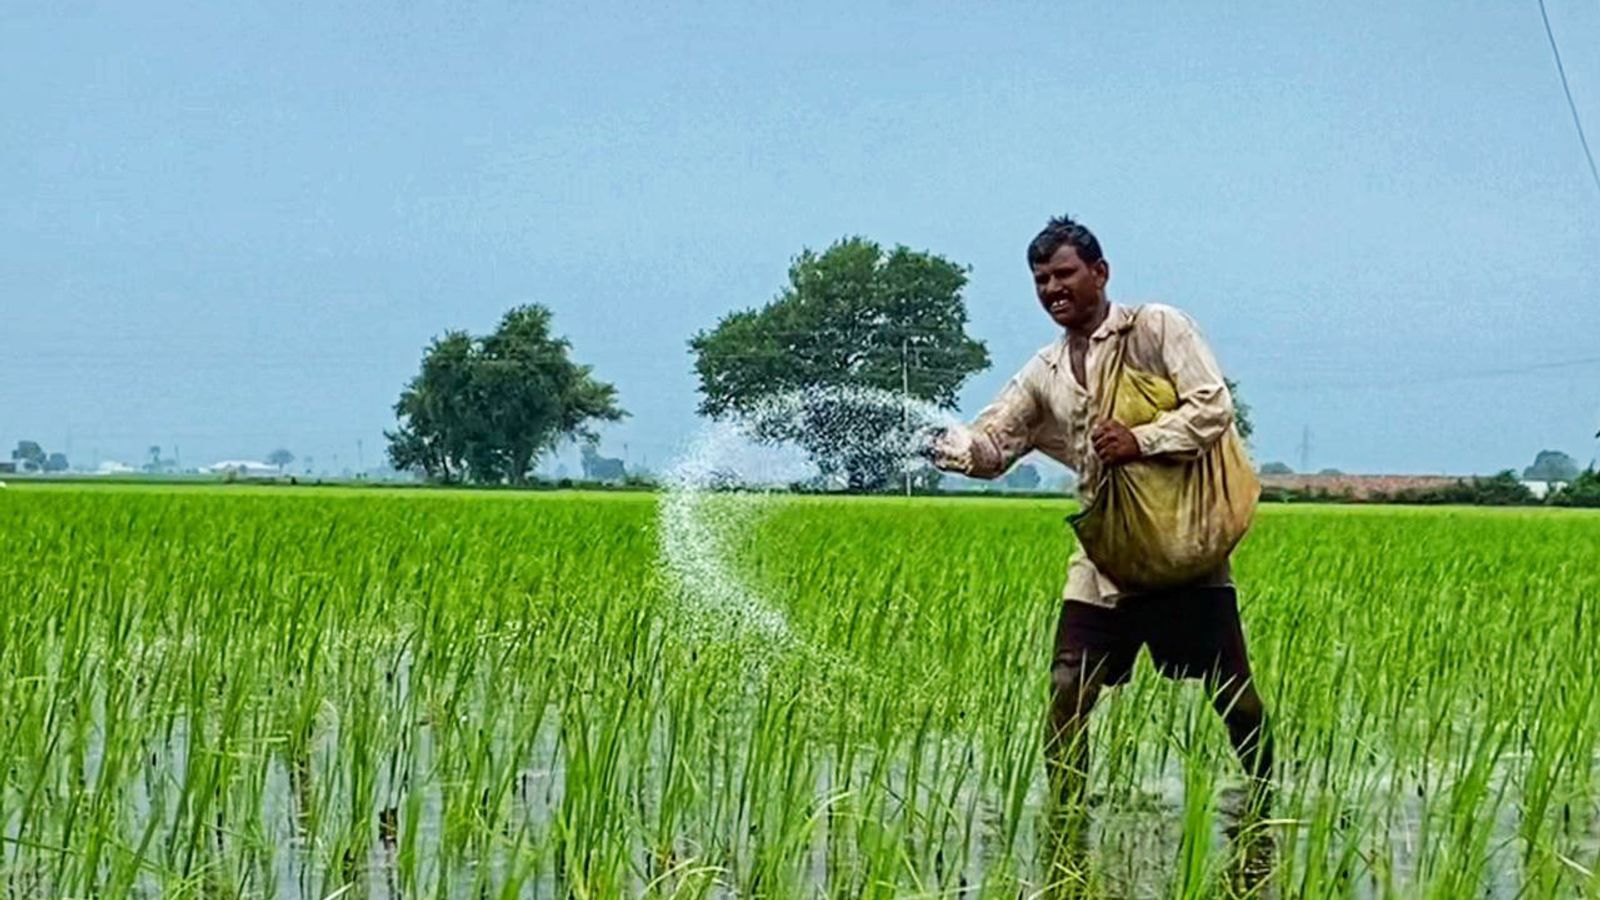 'Some will go hungry, some will starve': Global rice shortages feared after India bans exports